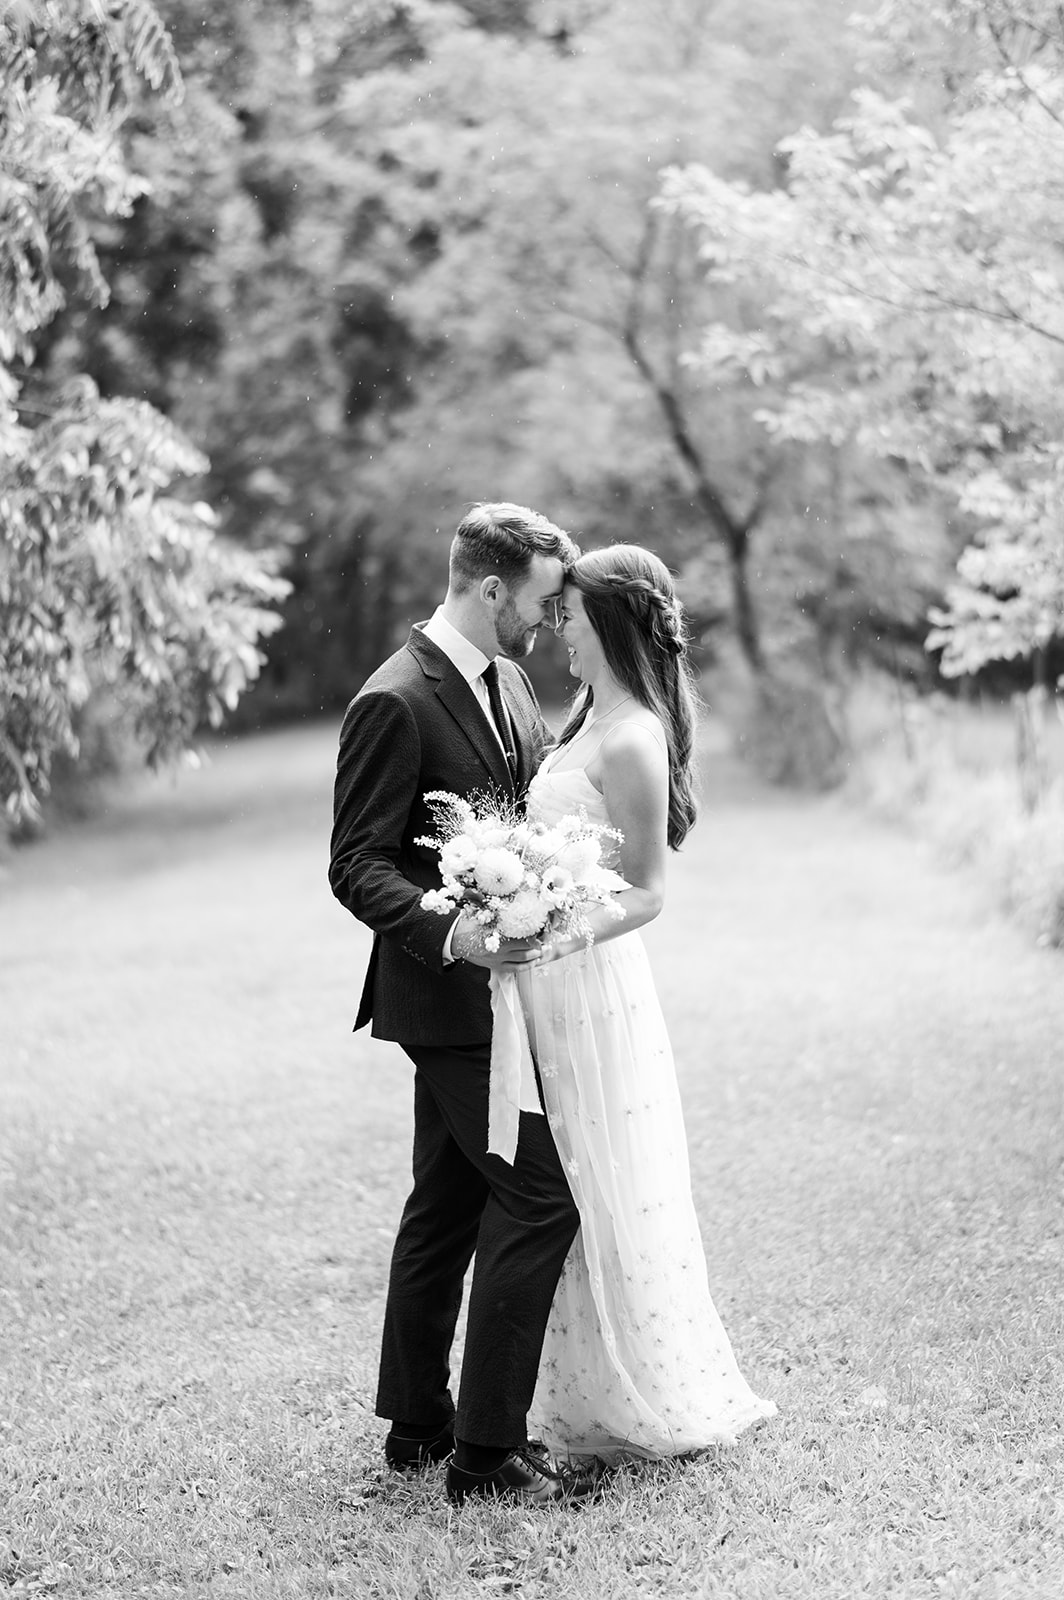 Storytelling wedding photography, Natural light wedding photography, Hamilton wedding photographer services,